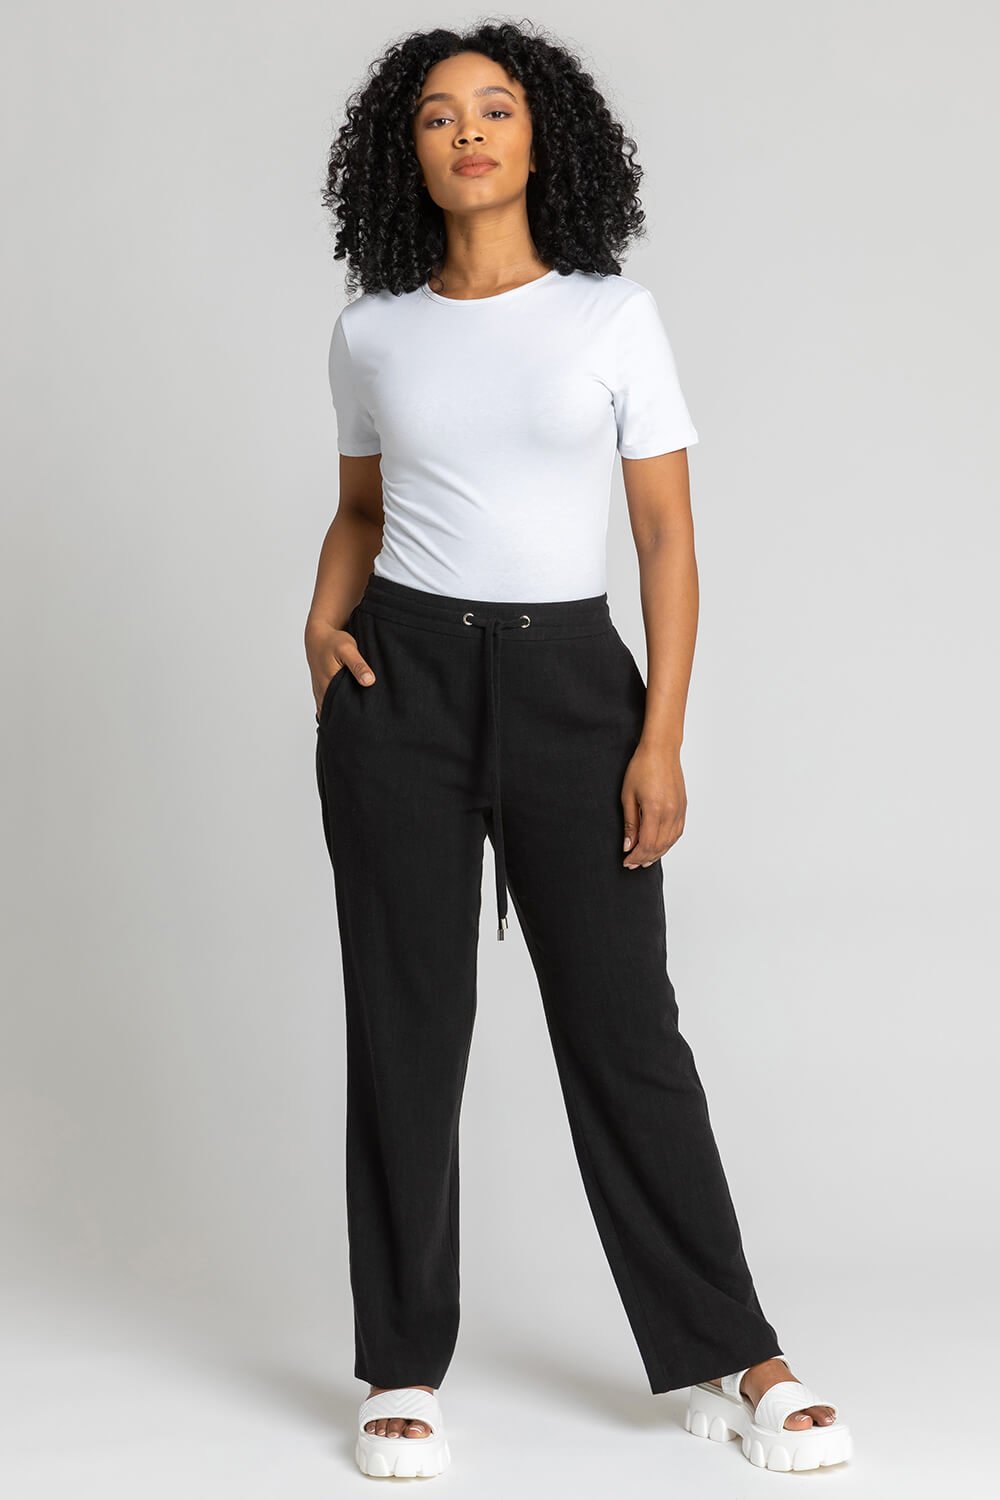 Discover 71+ black linen trousers womens uk - in.cdgdbentre